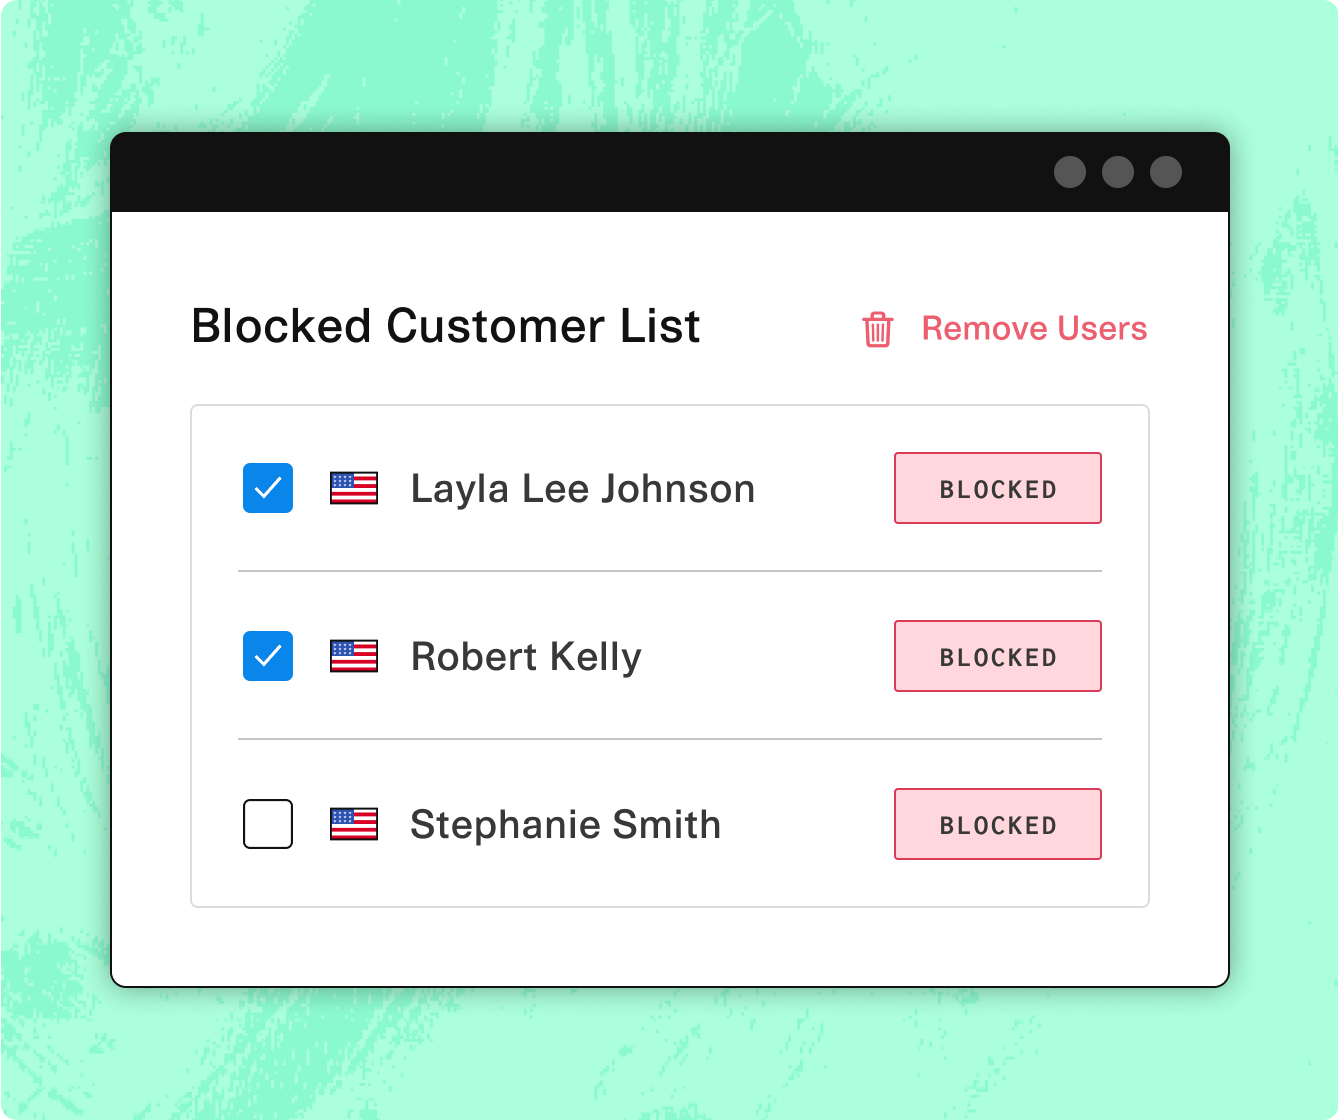 blocked customer list with names and checkmarks and blocked warning box